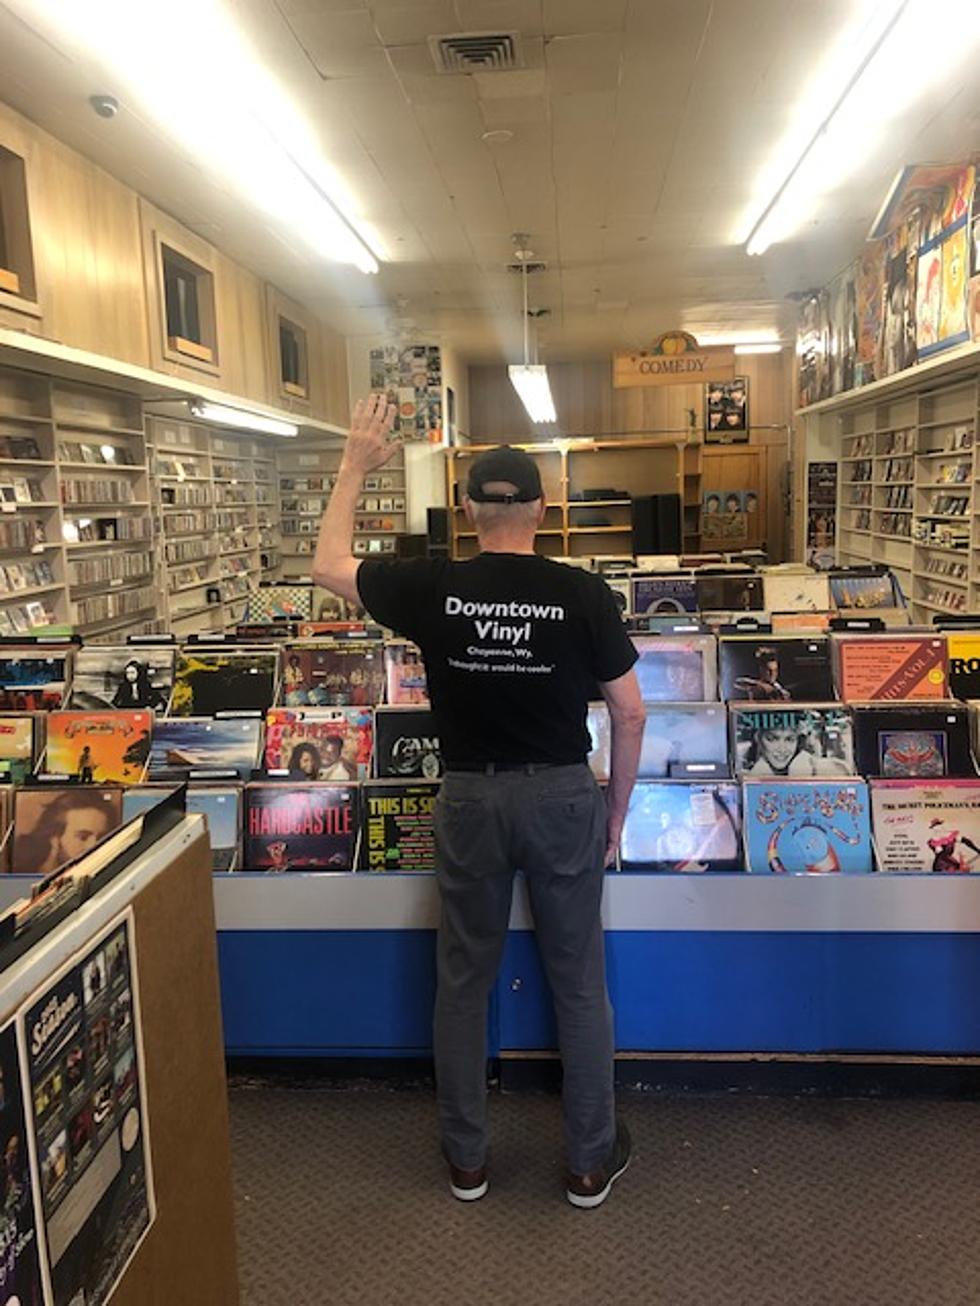 We Will Miss You Don! Cheyenne’s Downtown Vinyl Has A New Owner